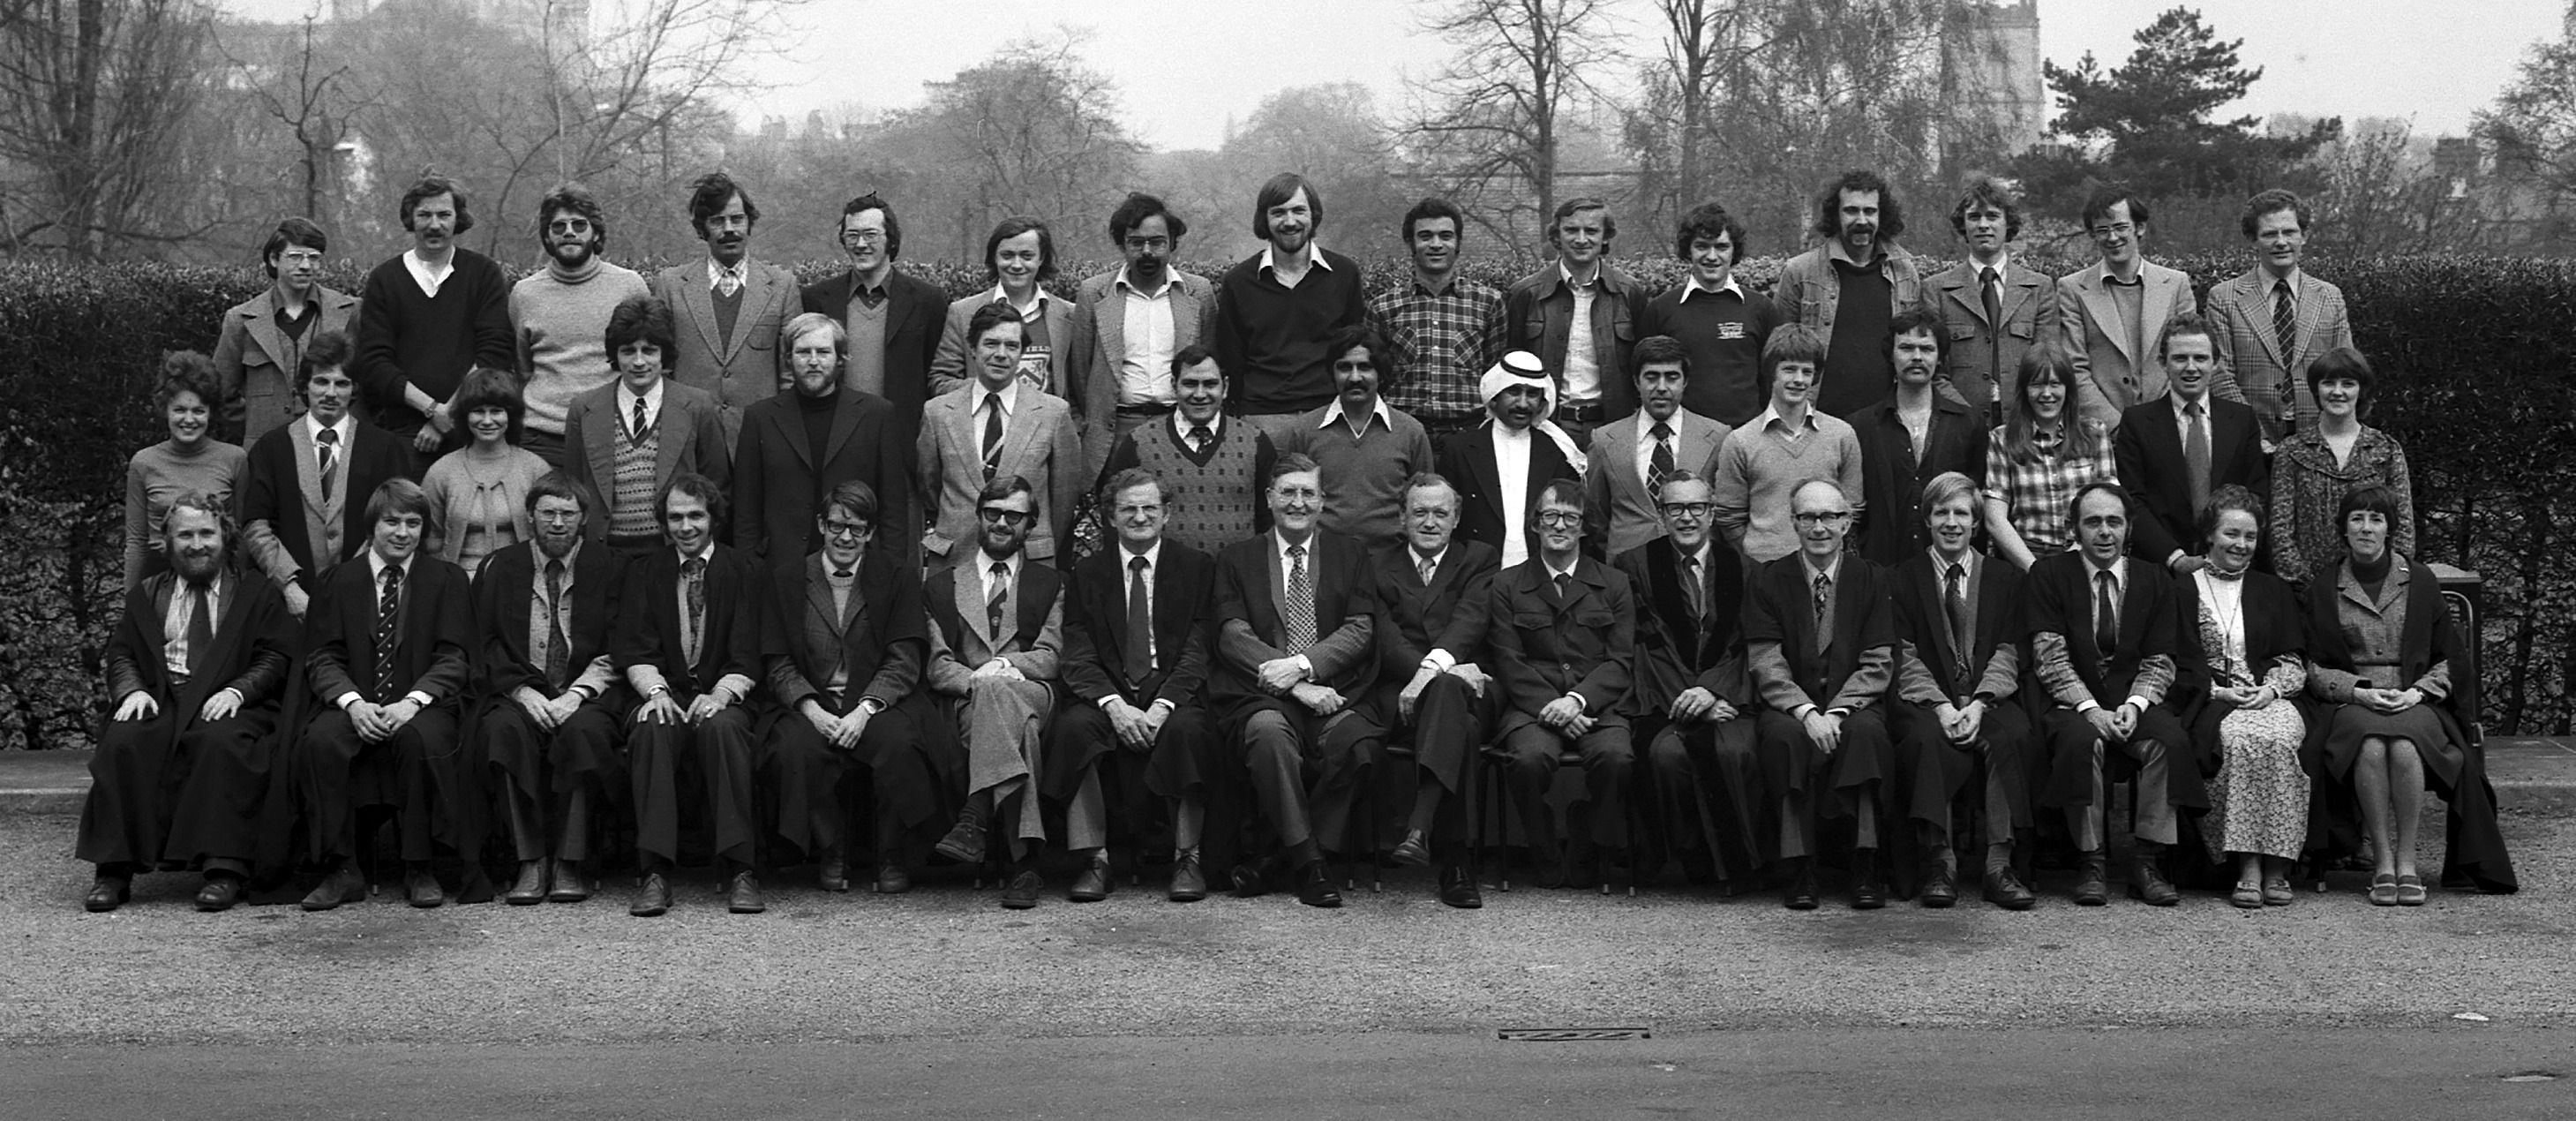 Geography Department Postgraduate Group Photo from 1978